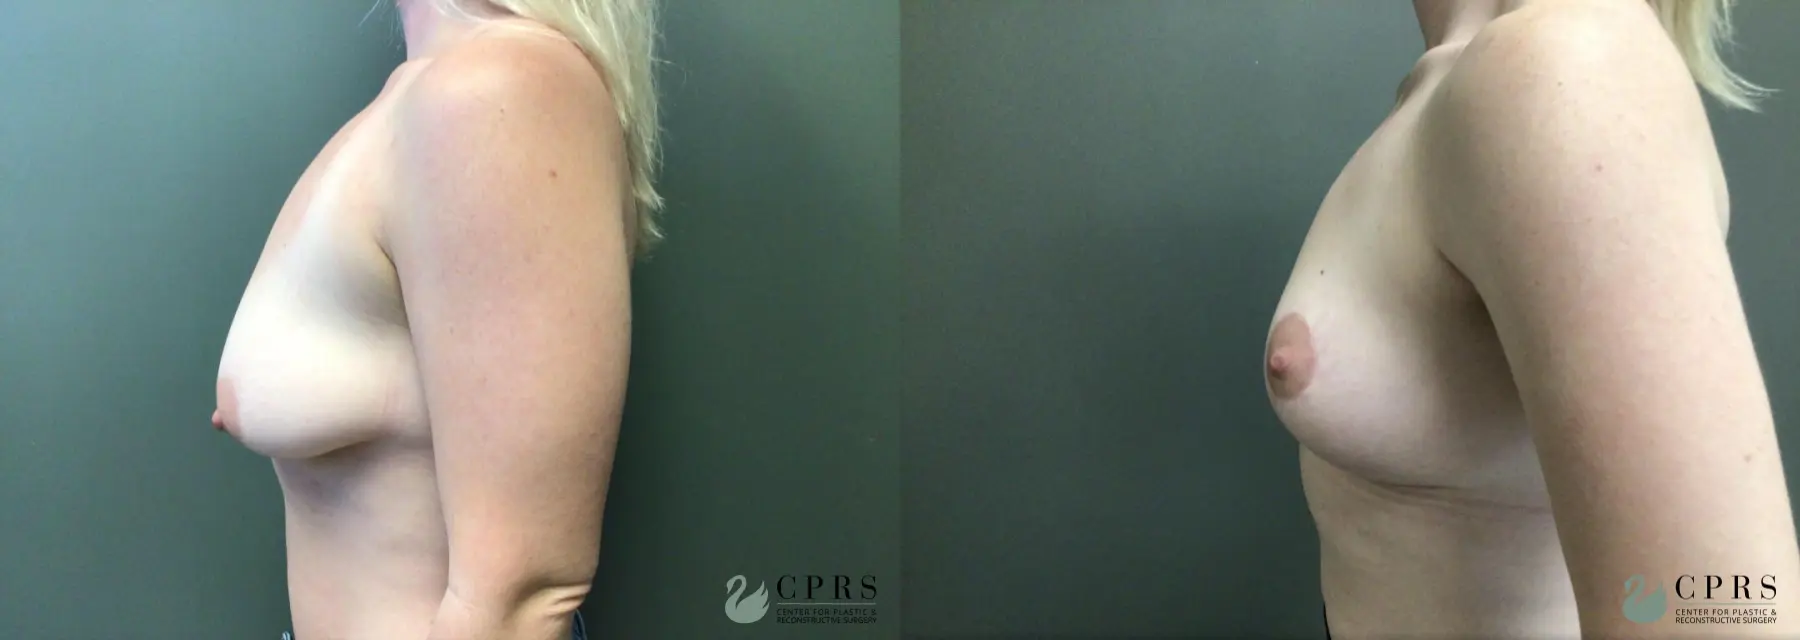 Breast Lift: Patient 6 - Before and After 2